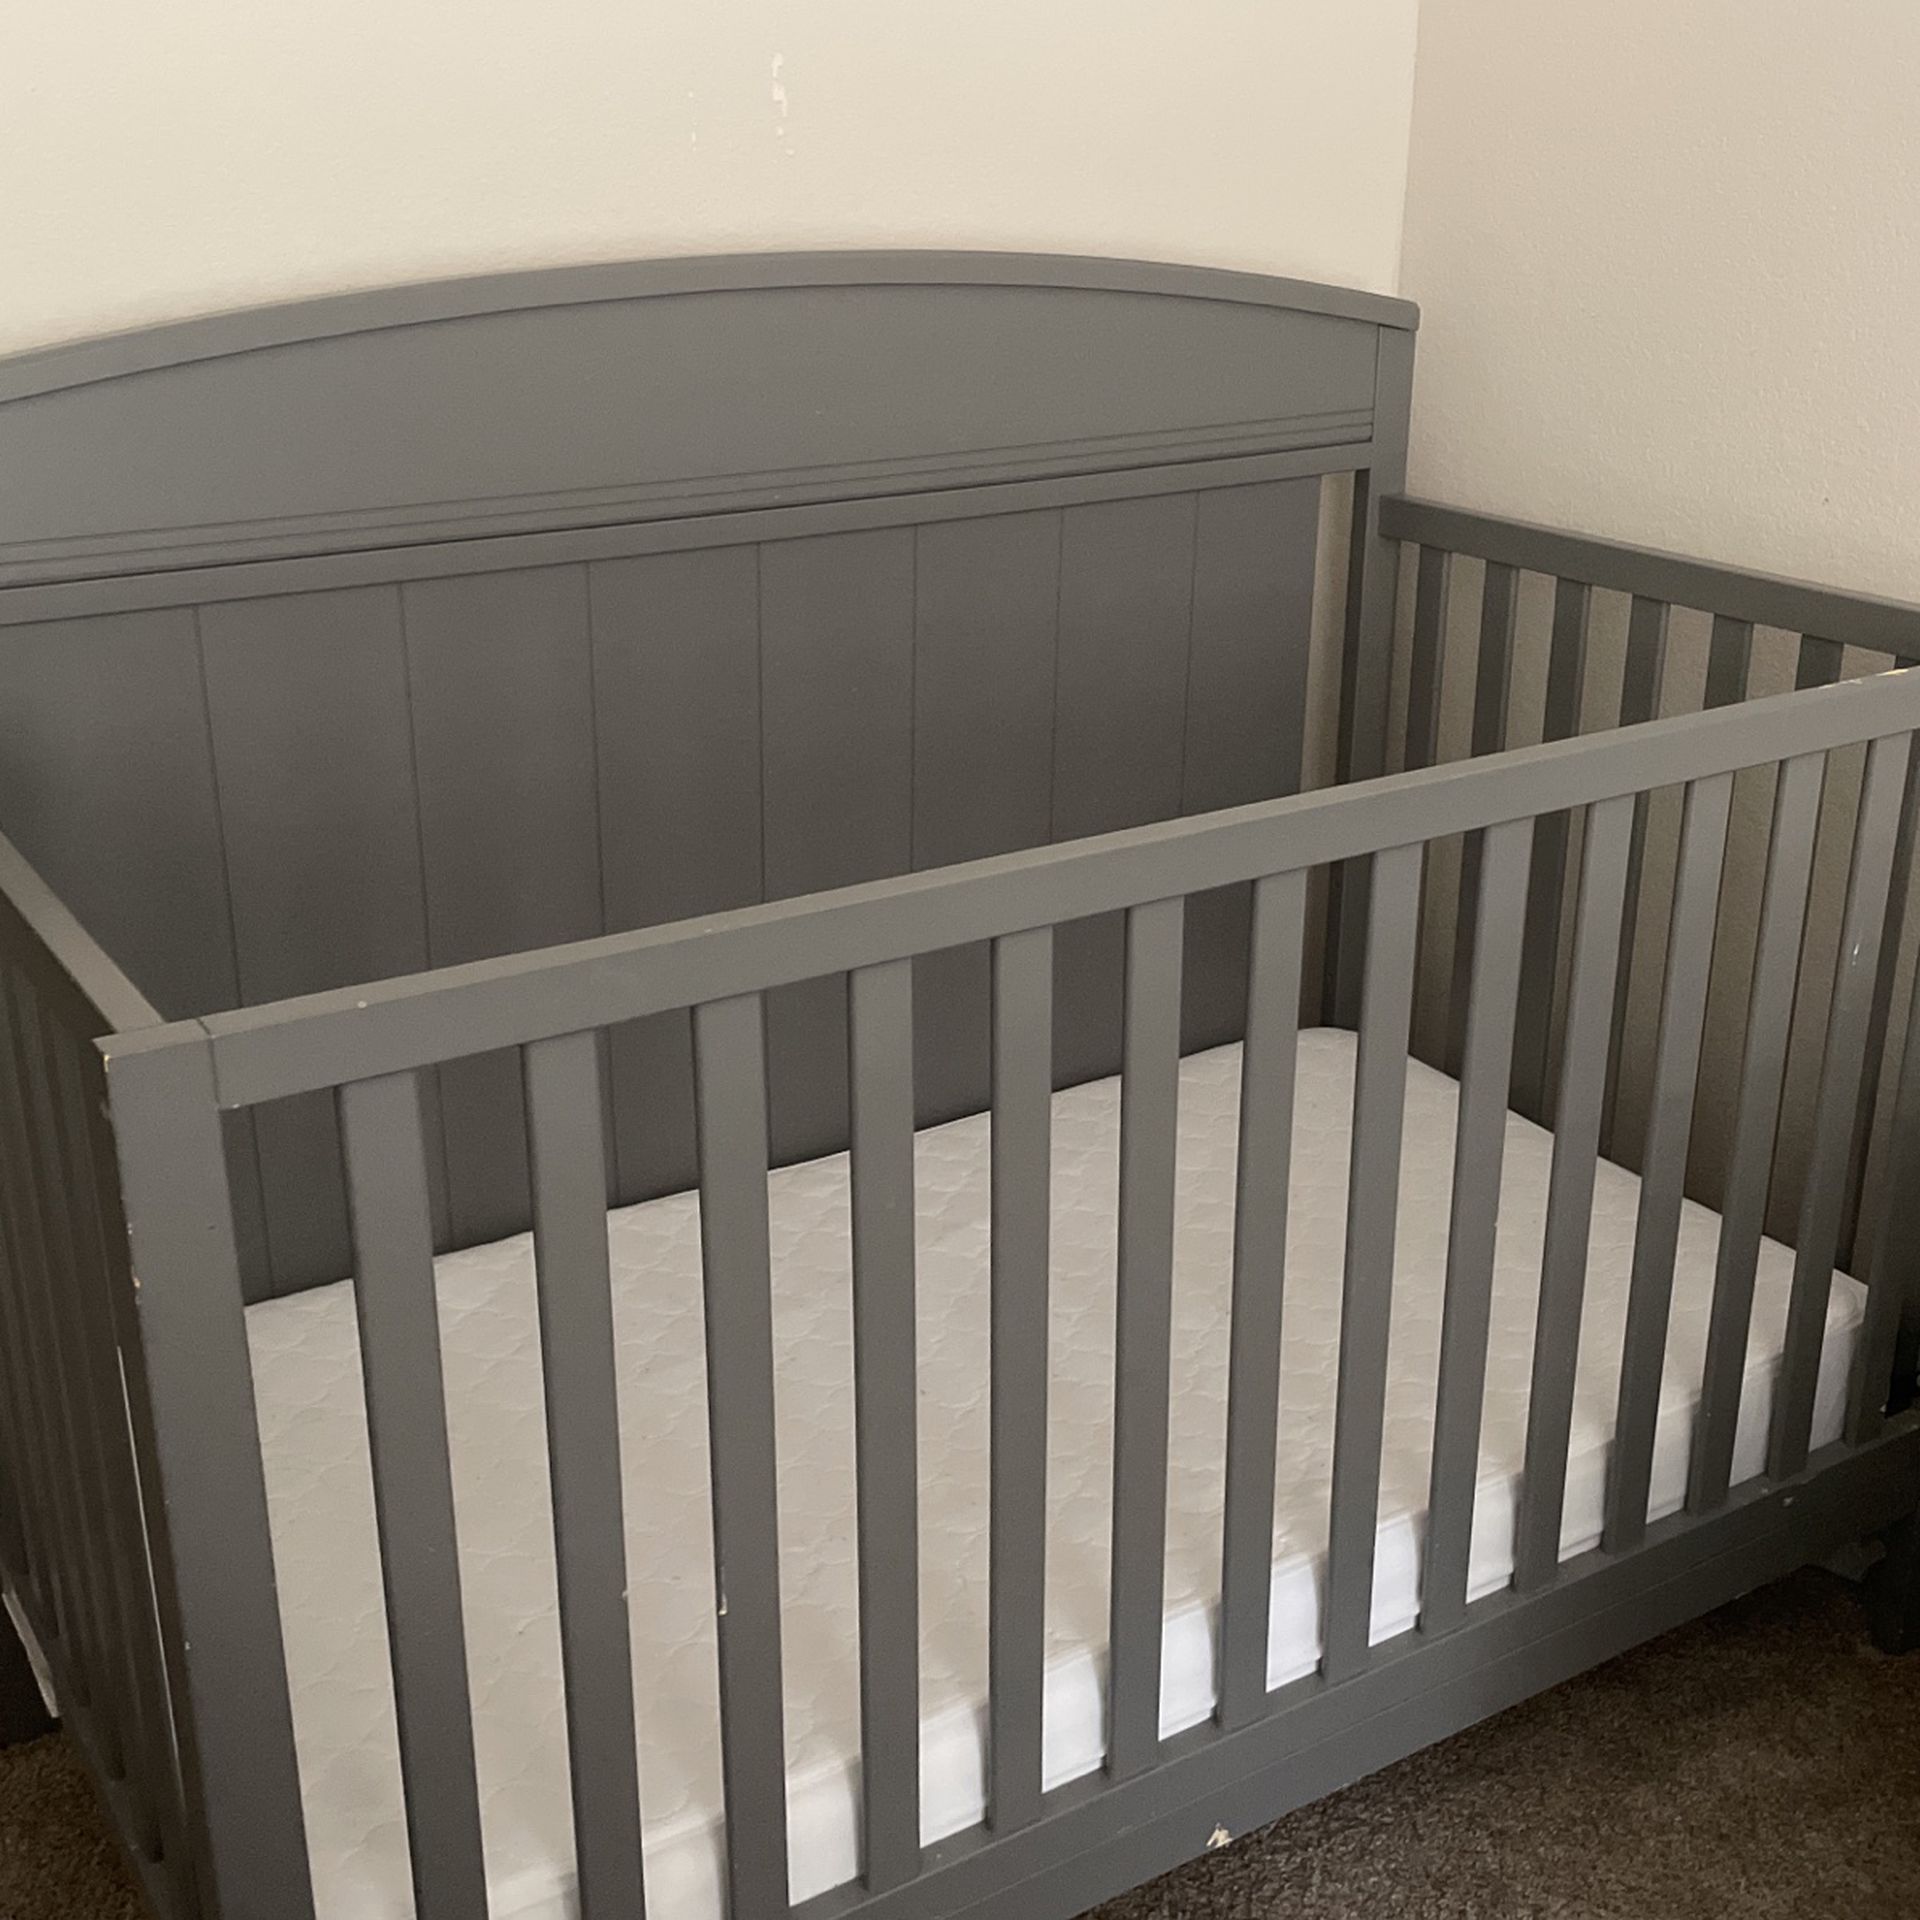 Crib For Baby And mattress